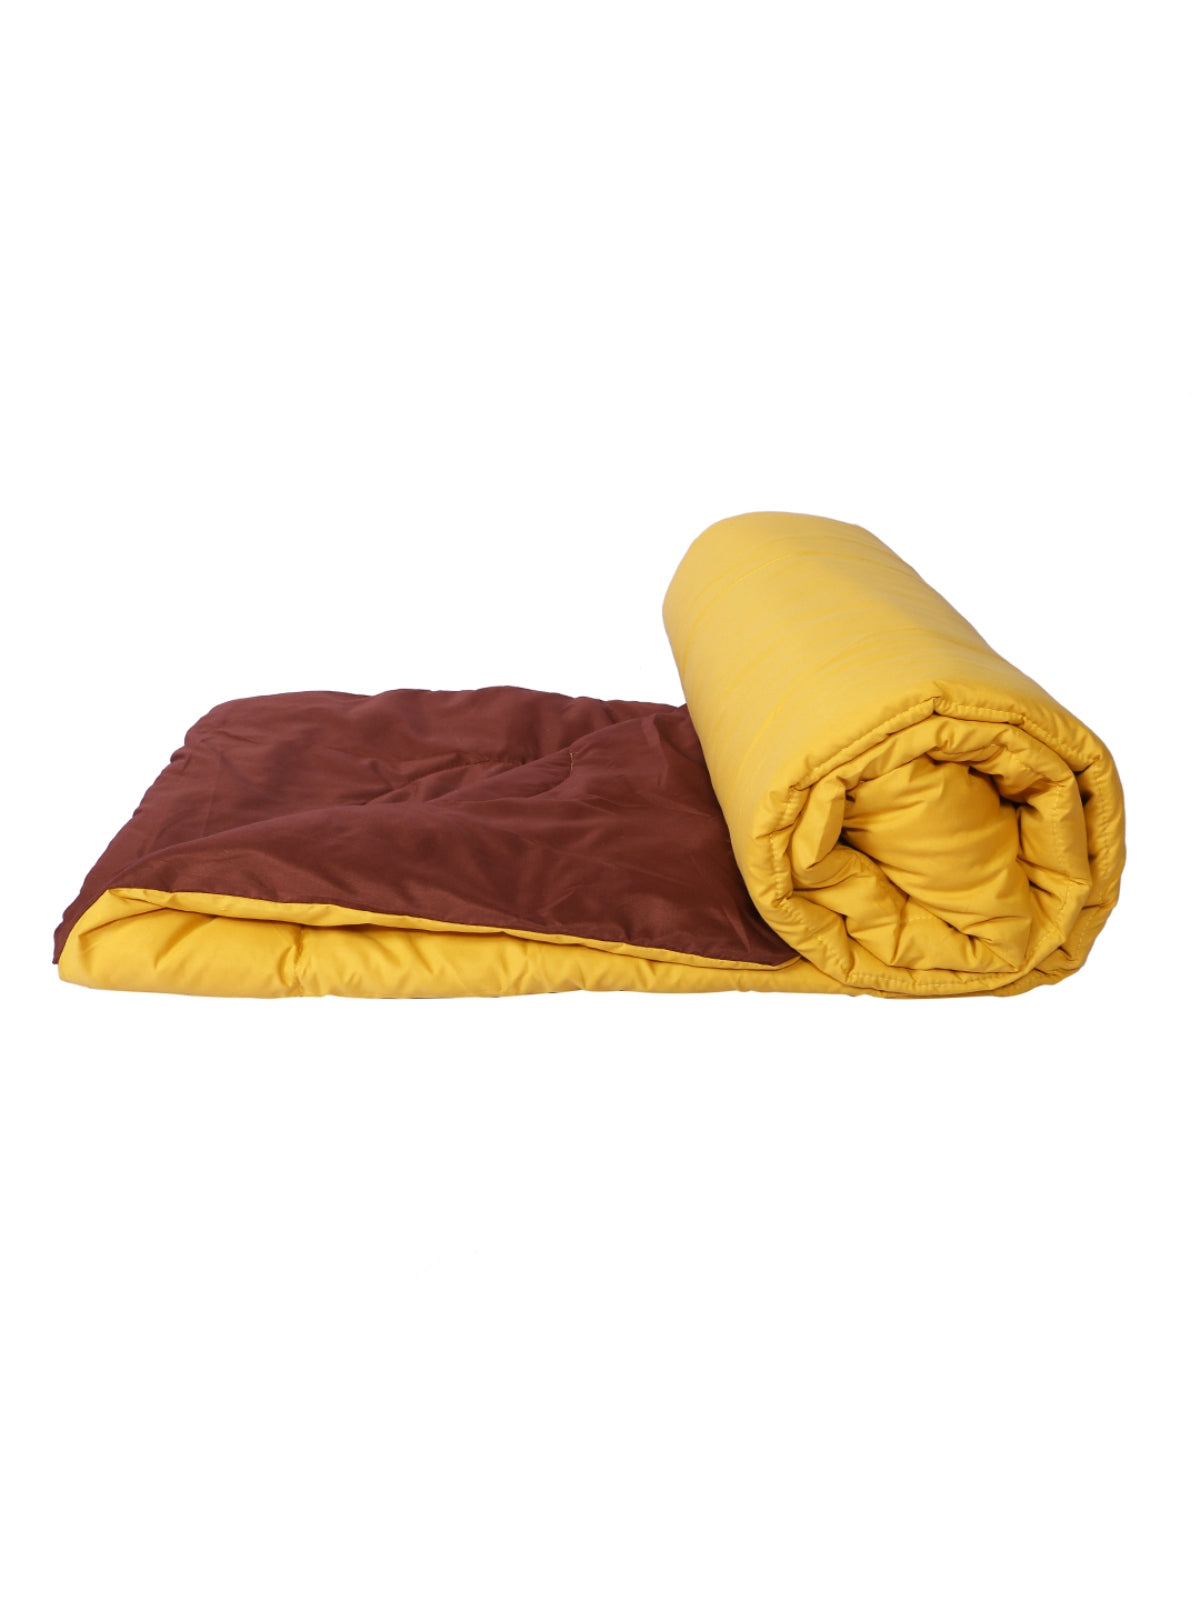 Solid 200 GSM Reversible AC Comforter for Double Bed - Brown & Yellow